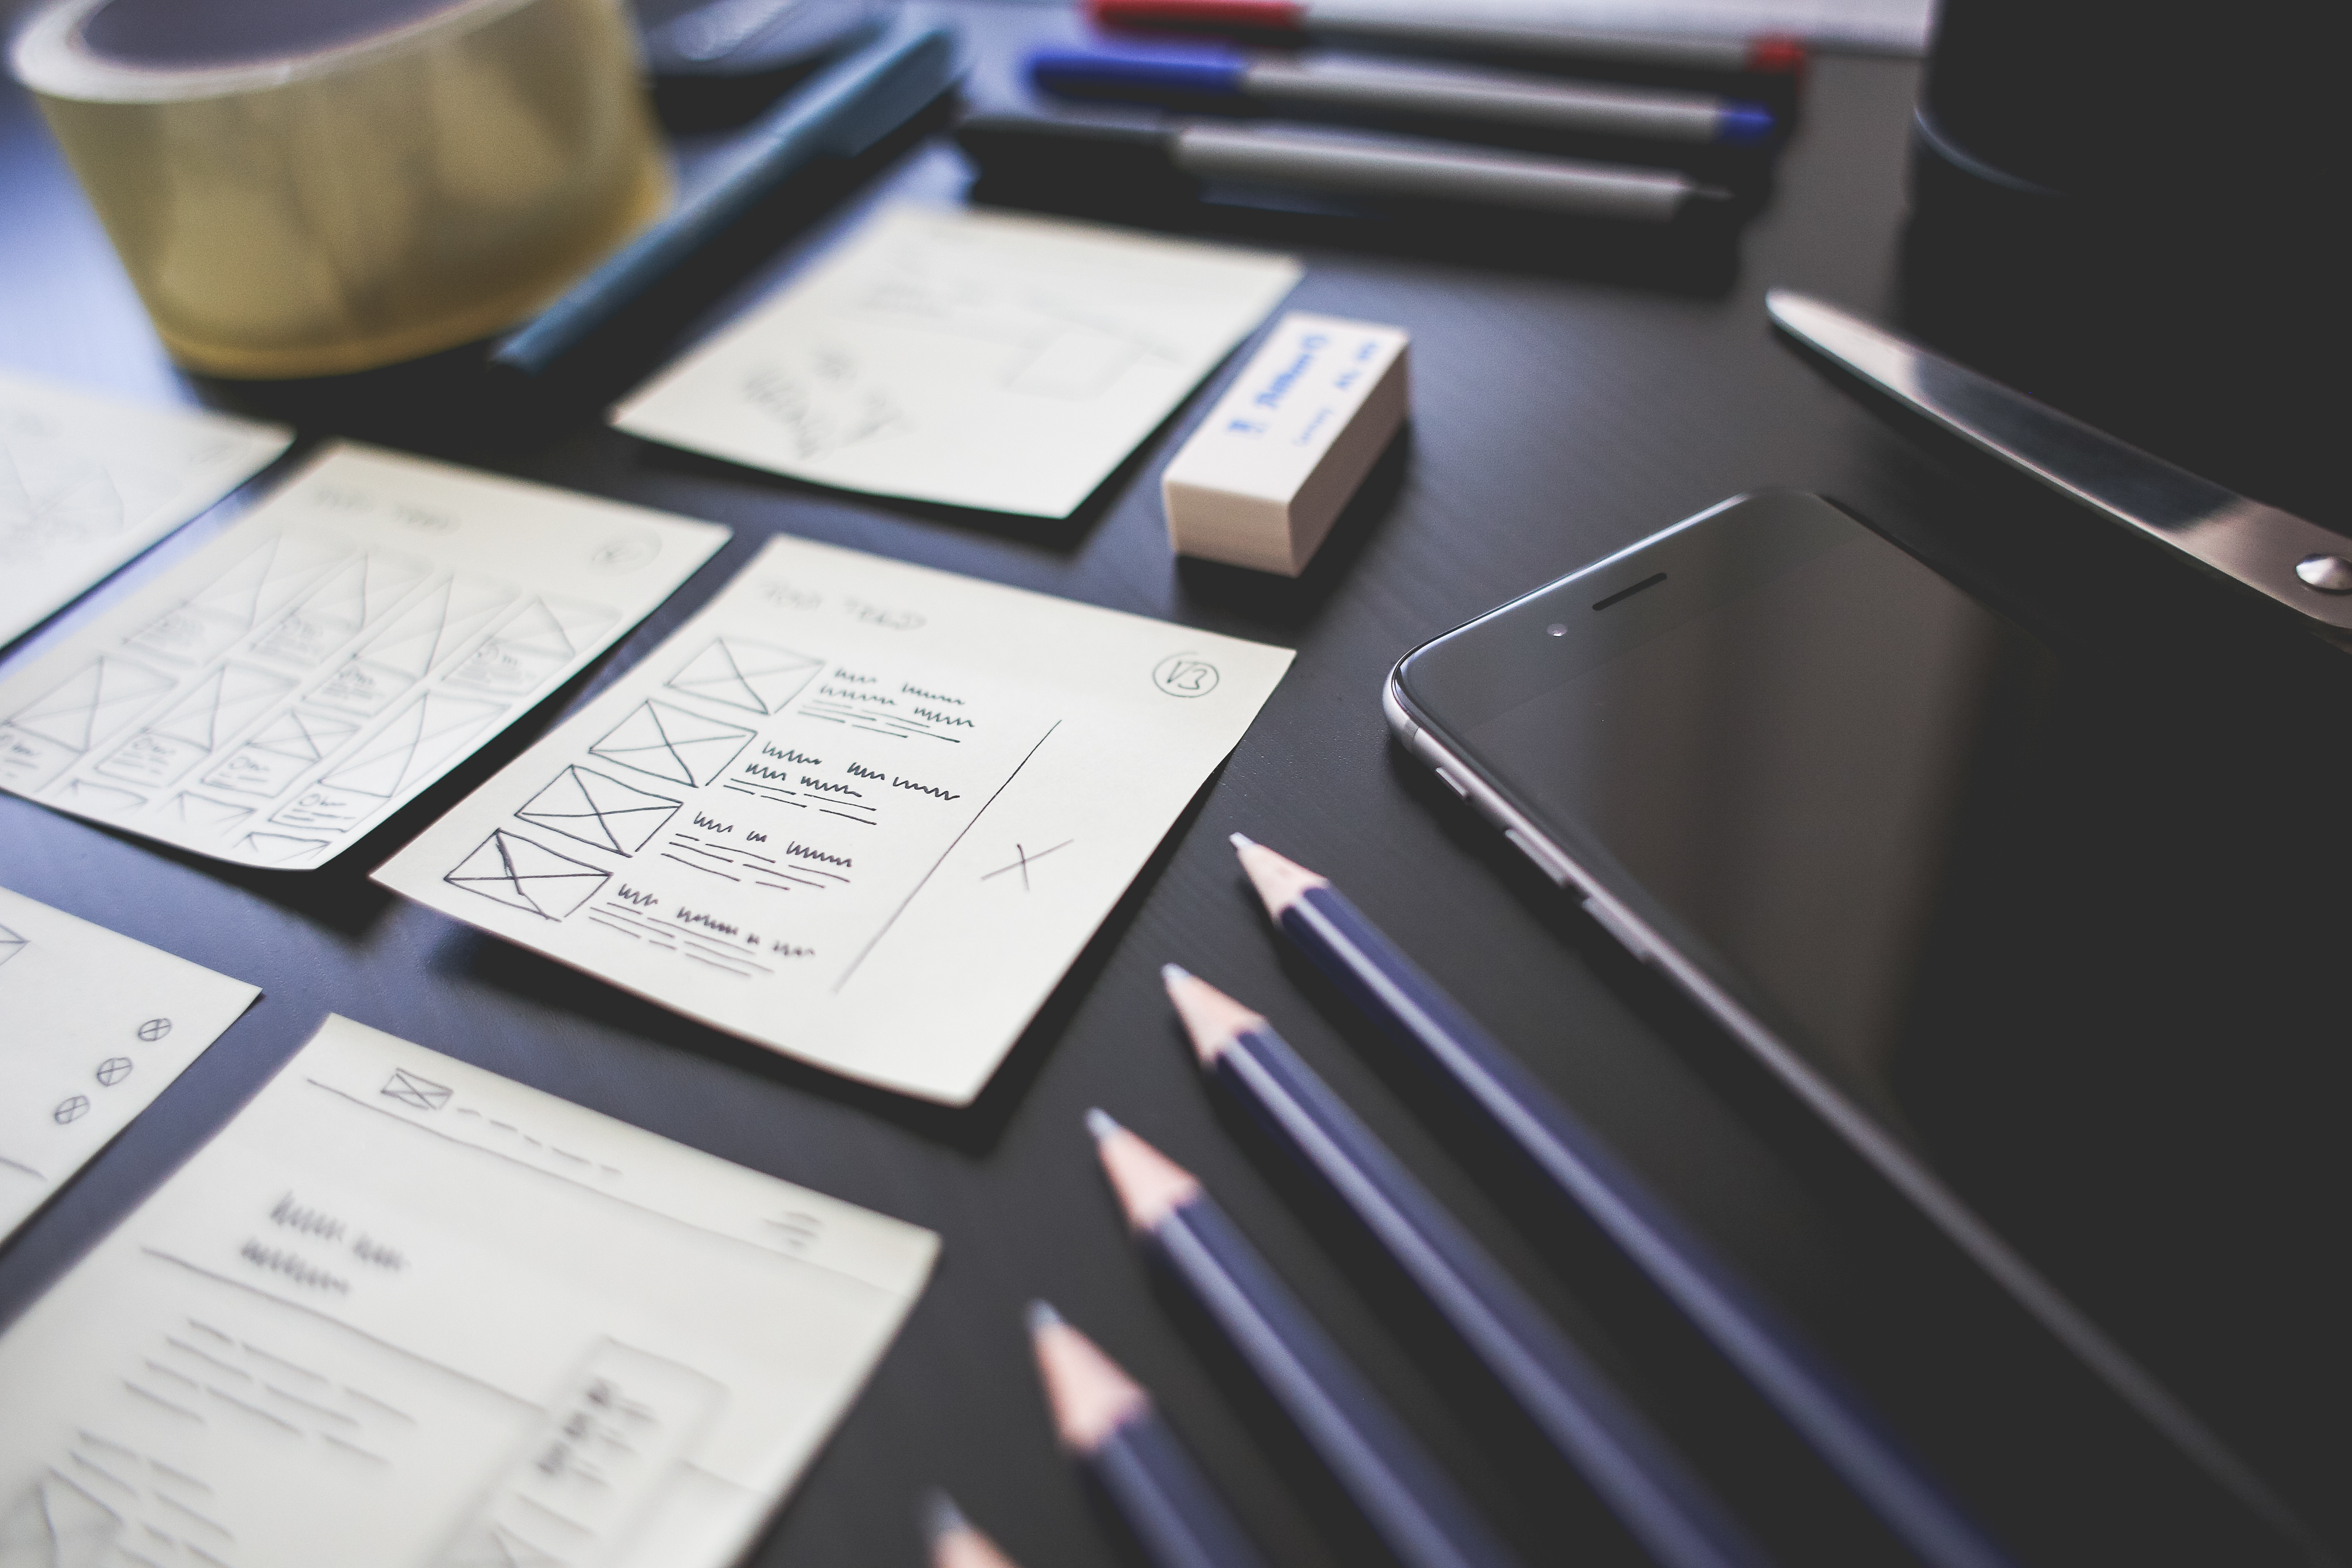 hand-drawn wireframes on a desk surrounded by various office supplies and a smartphone